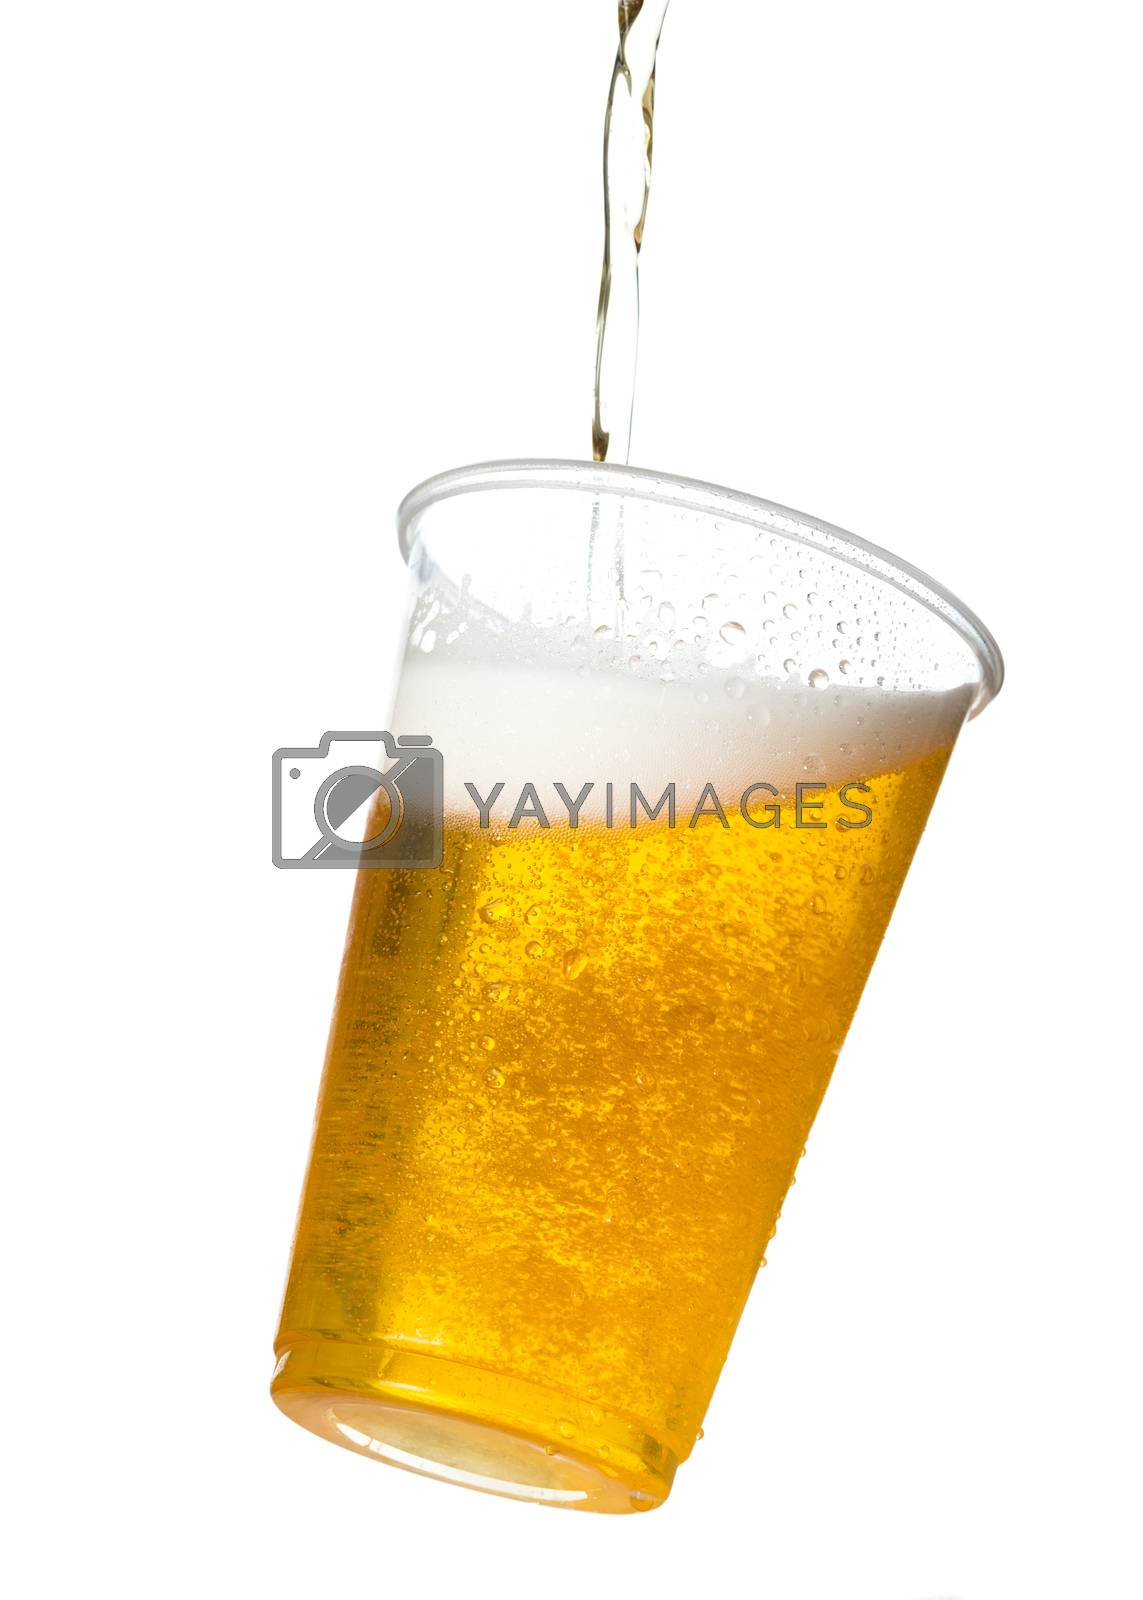 Royalty free image of Golden lager or beer in disposable plastic cup by steheap